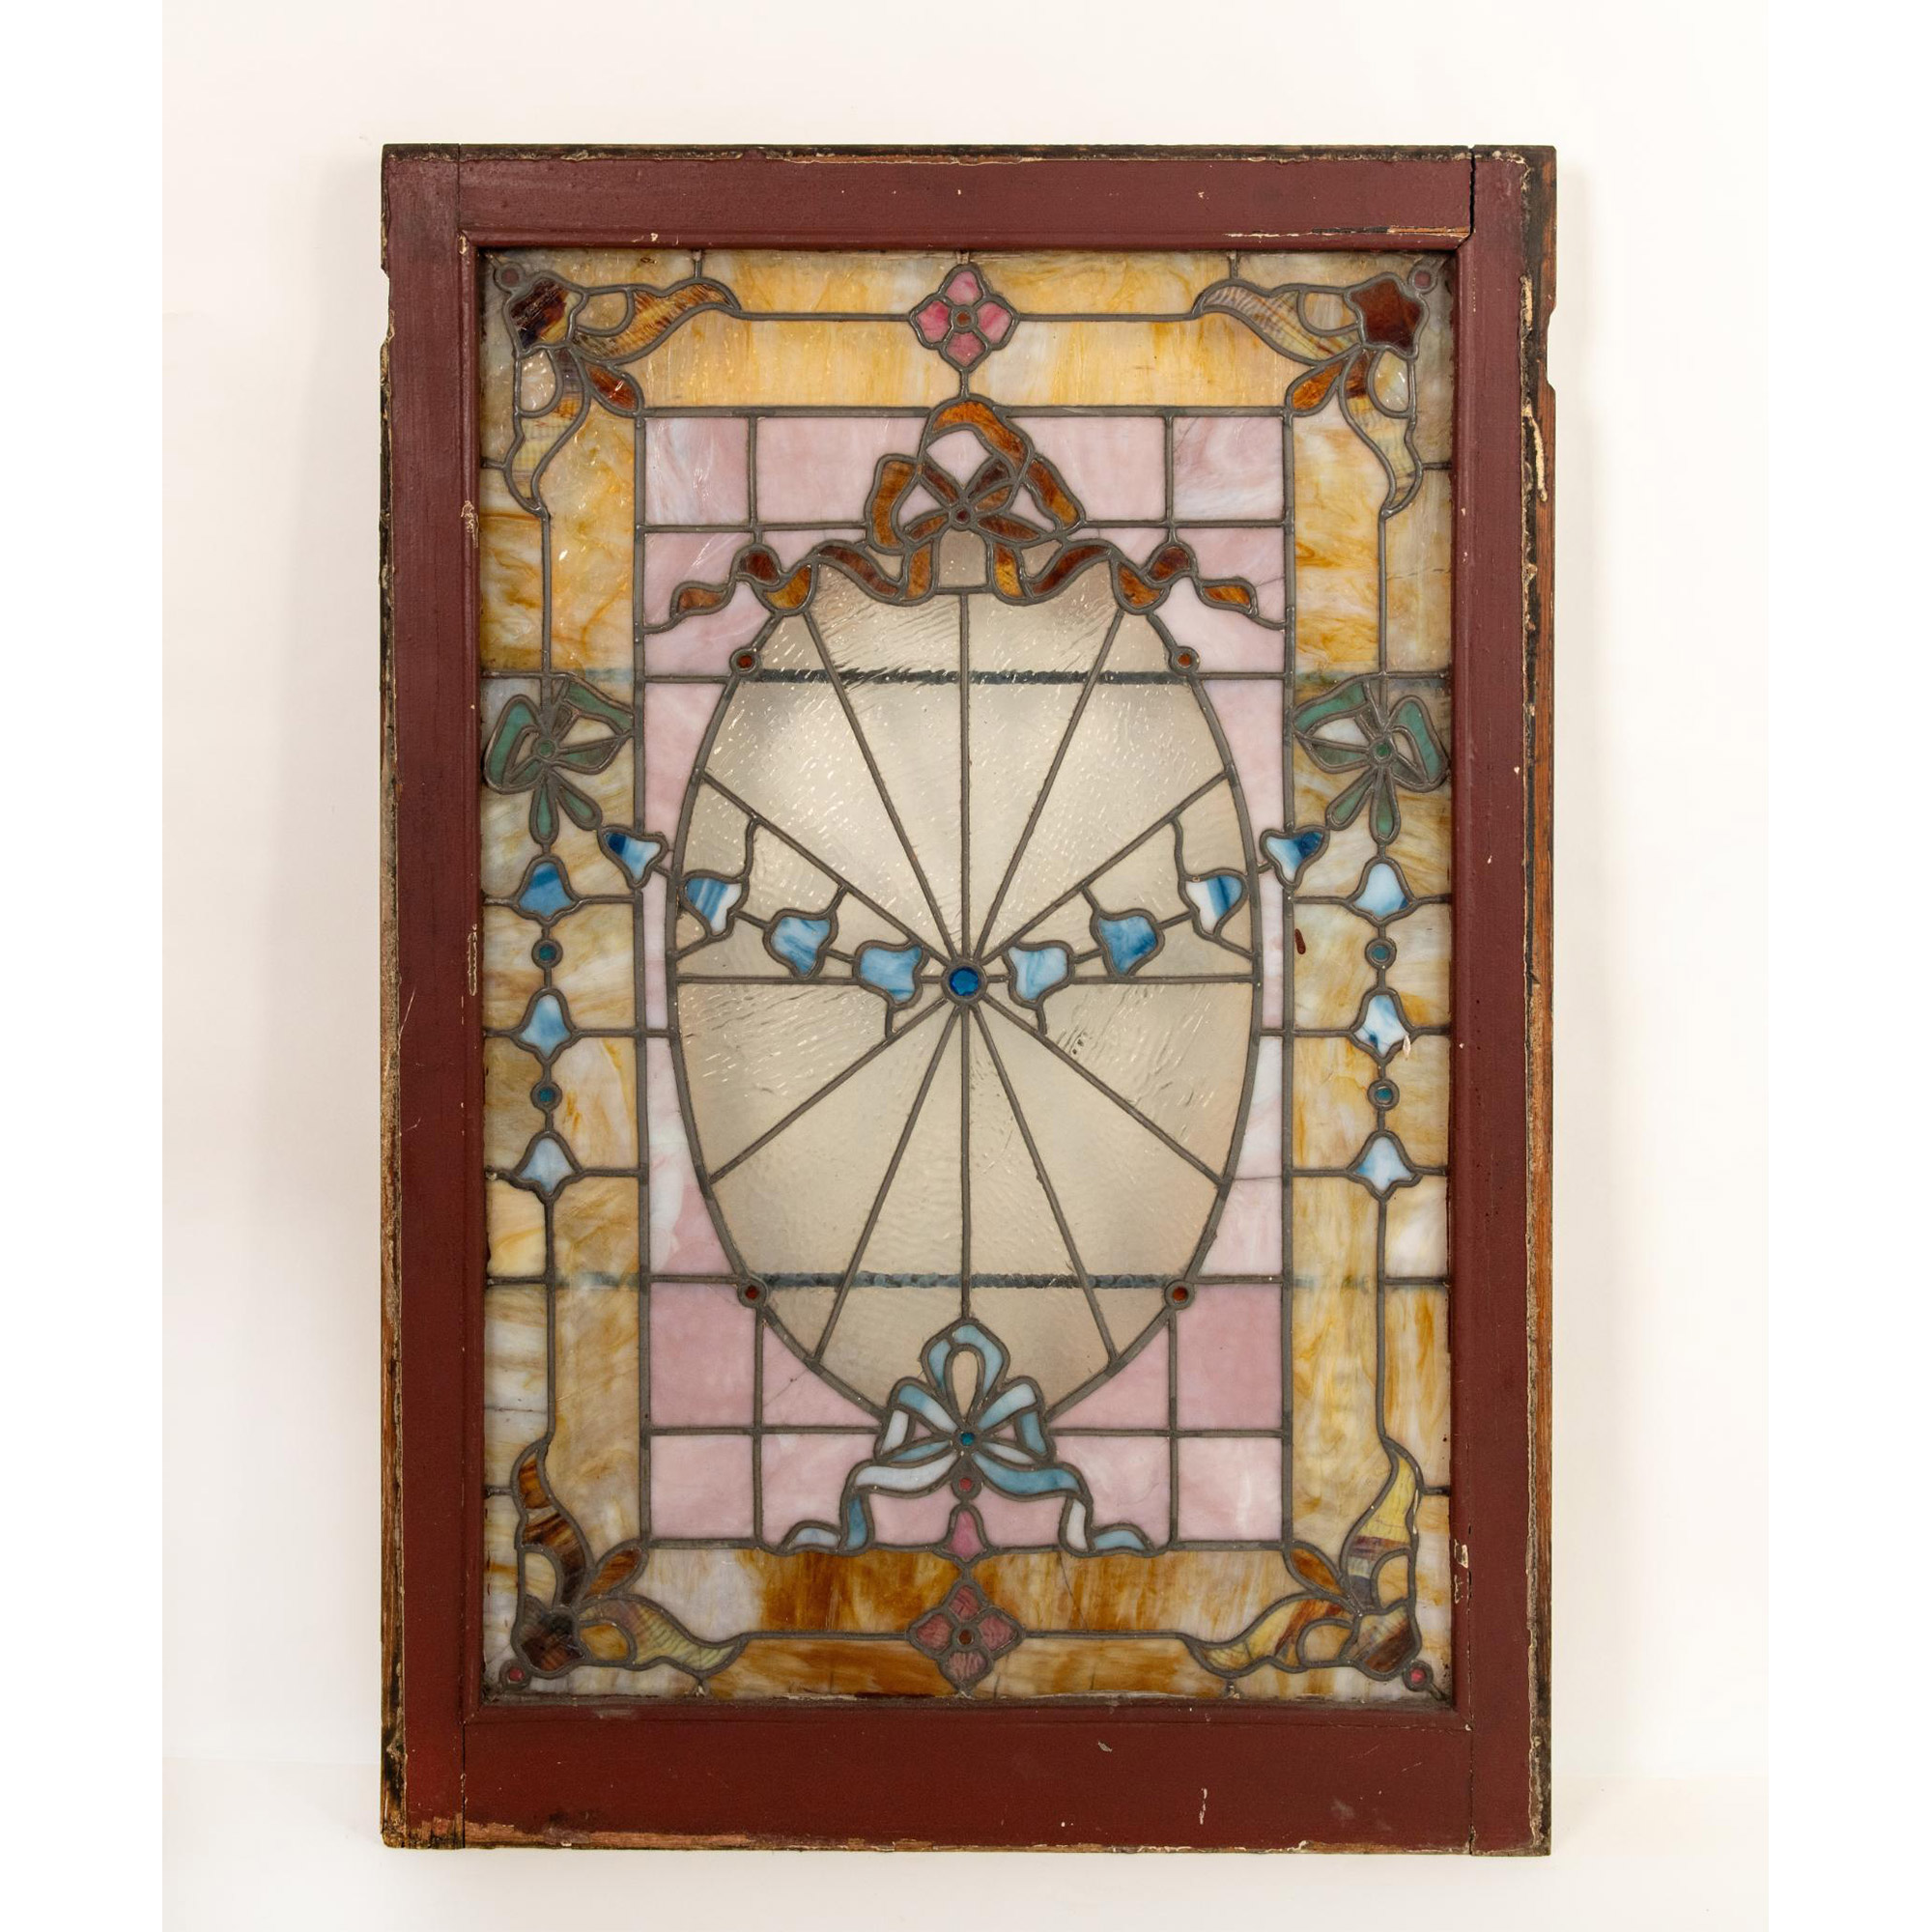 Antique Original Victorian Stained Glass Window Panel - Image 5 of 6